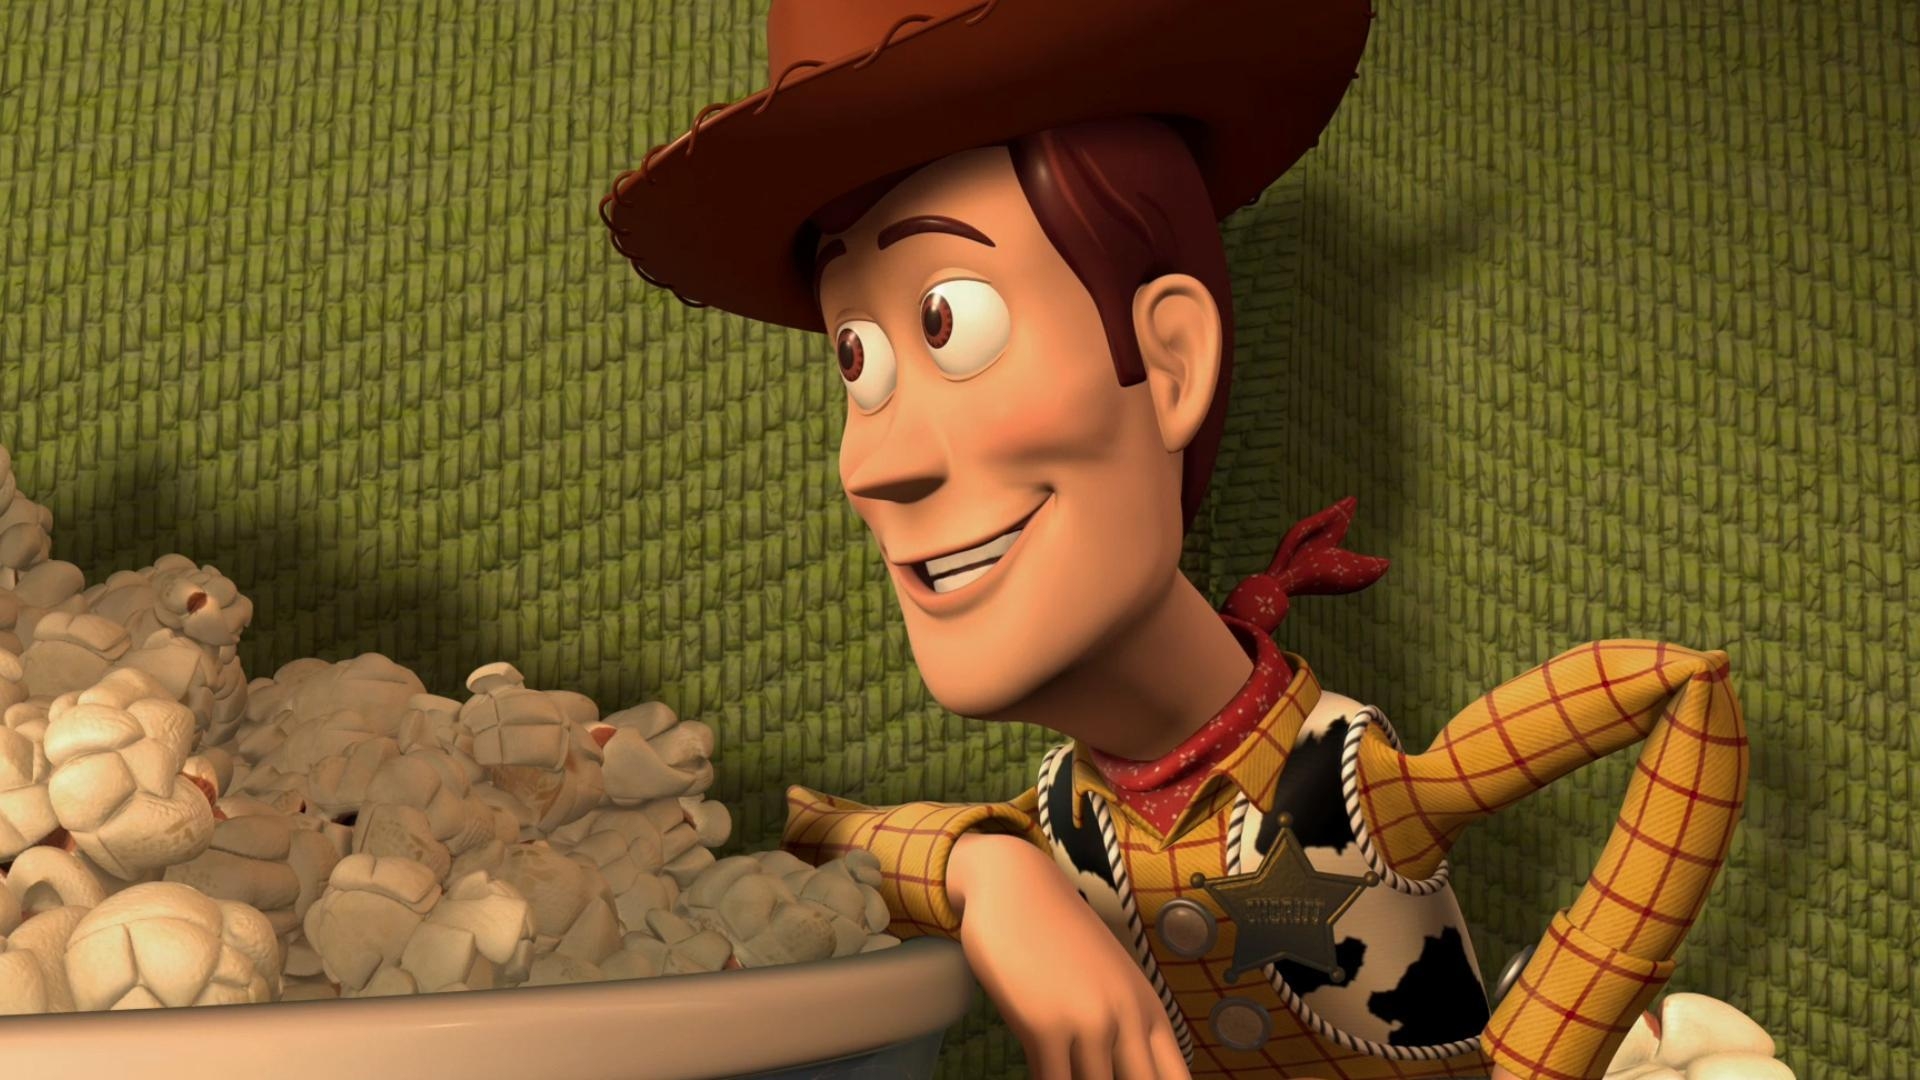 Woody for 1920 x 1080 HDTV 1080p resolution